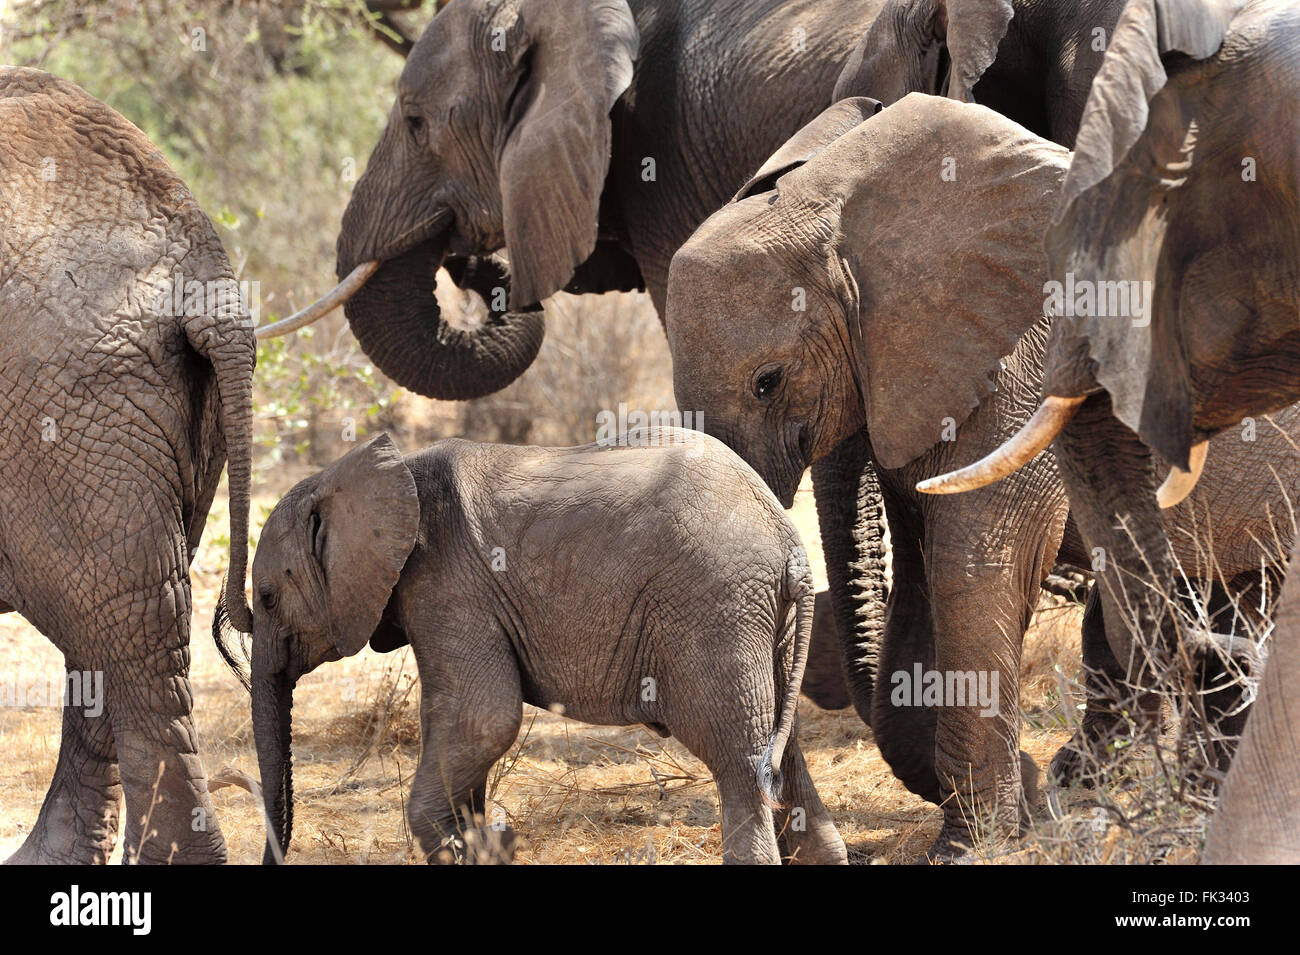 Small Elephant, Loxodonta africana, in the middle of its family Stock Photo